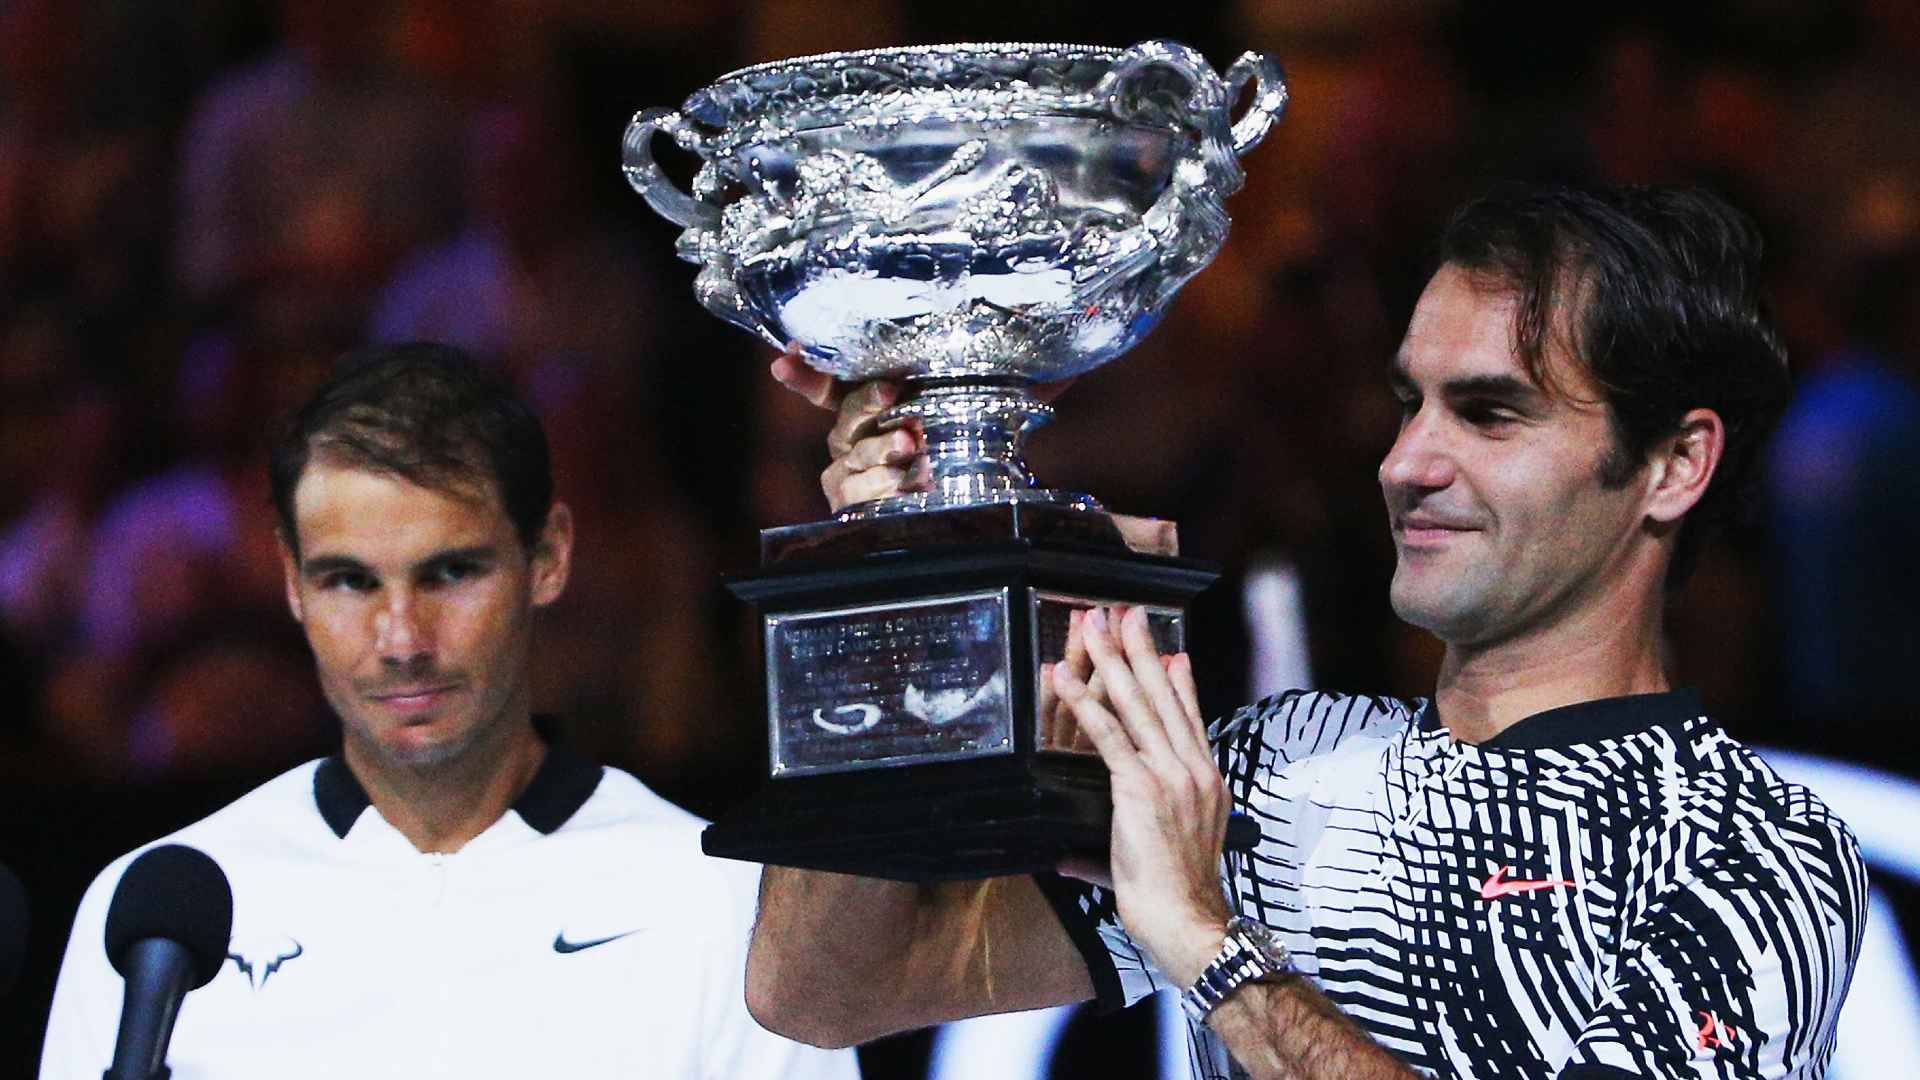 Roger Federer lists the 2017 Australian Open trophy after defeating Rafael Nadal in the final.